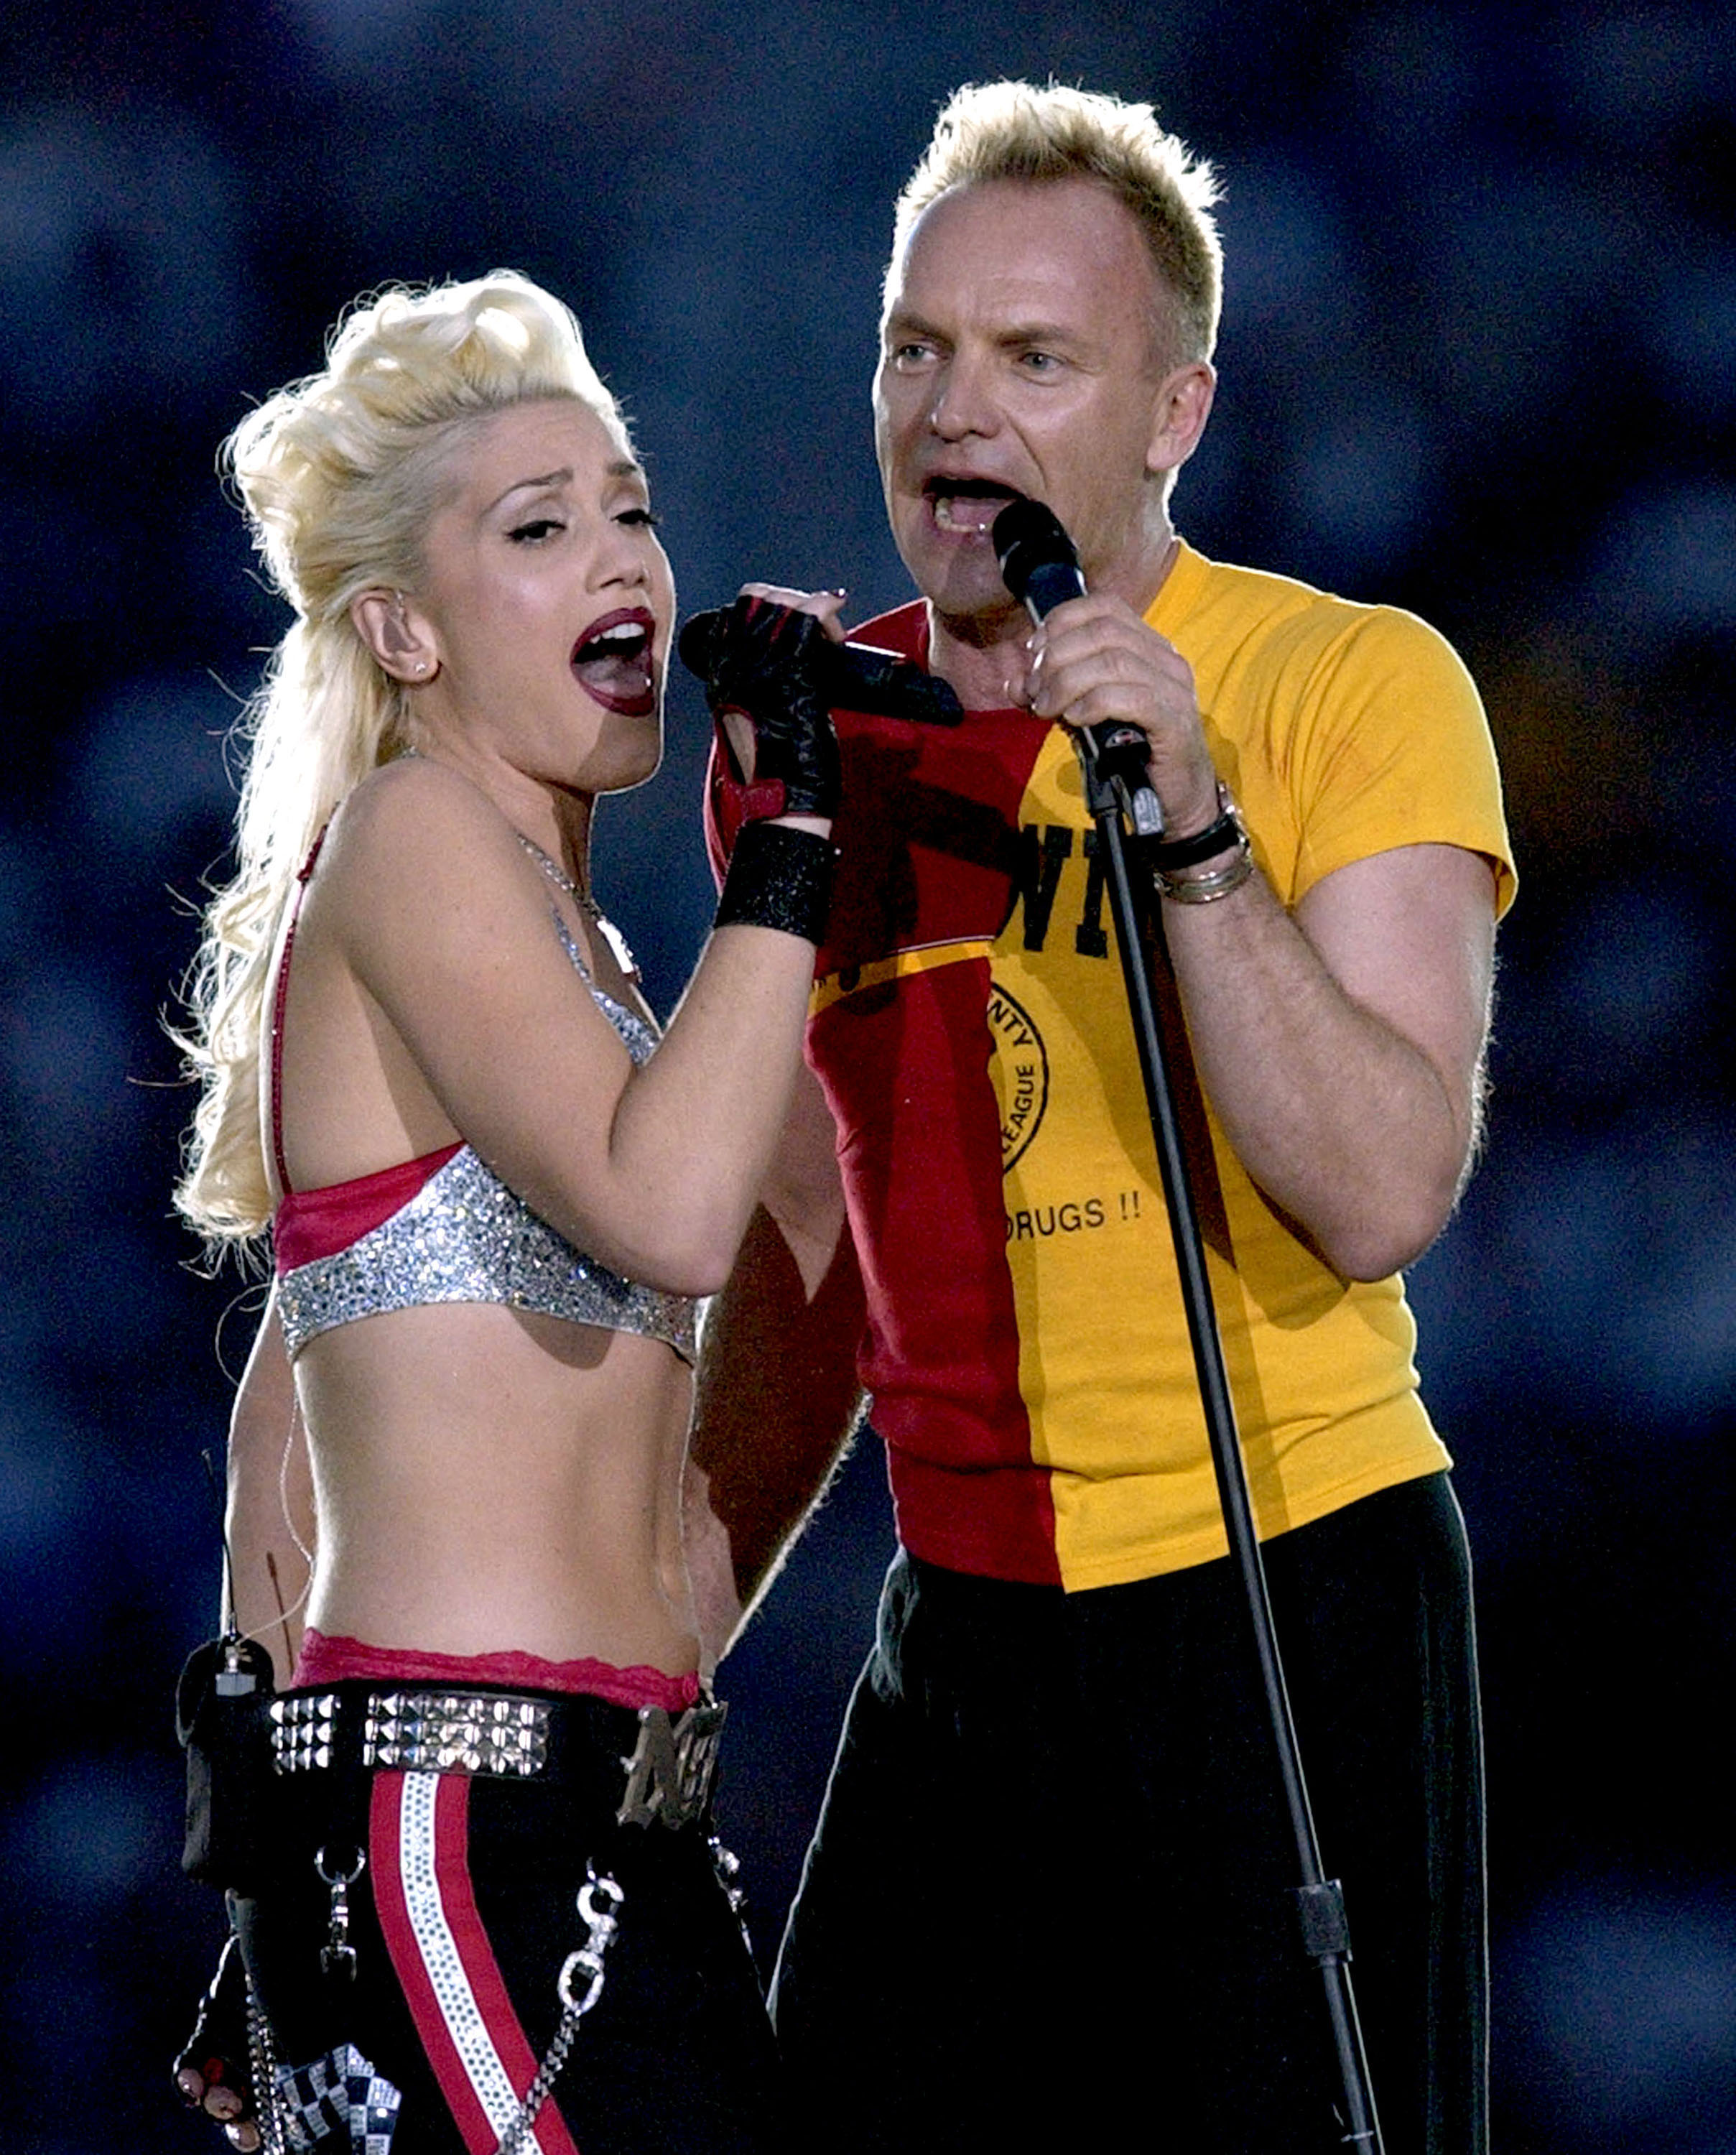 Gwen Stefani of No Doubt and Sting perform during Super Bowl XXXVII in San Diego, Calif. on Jan. 26, 2003.